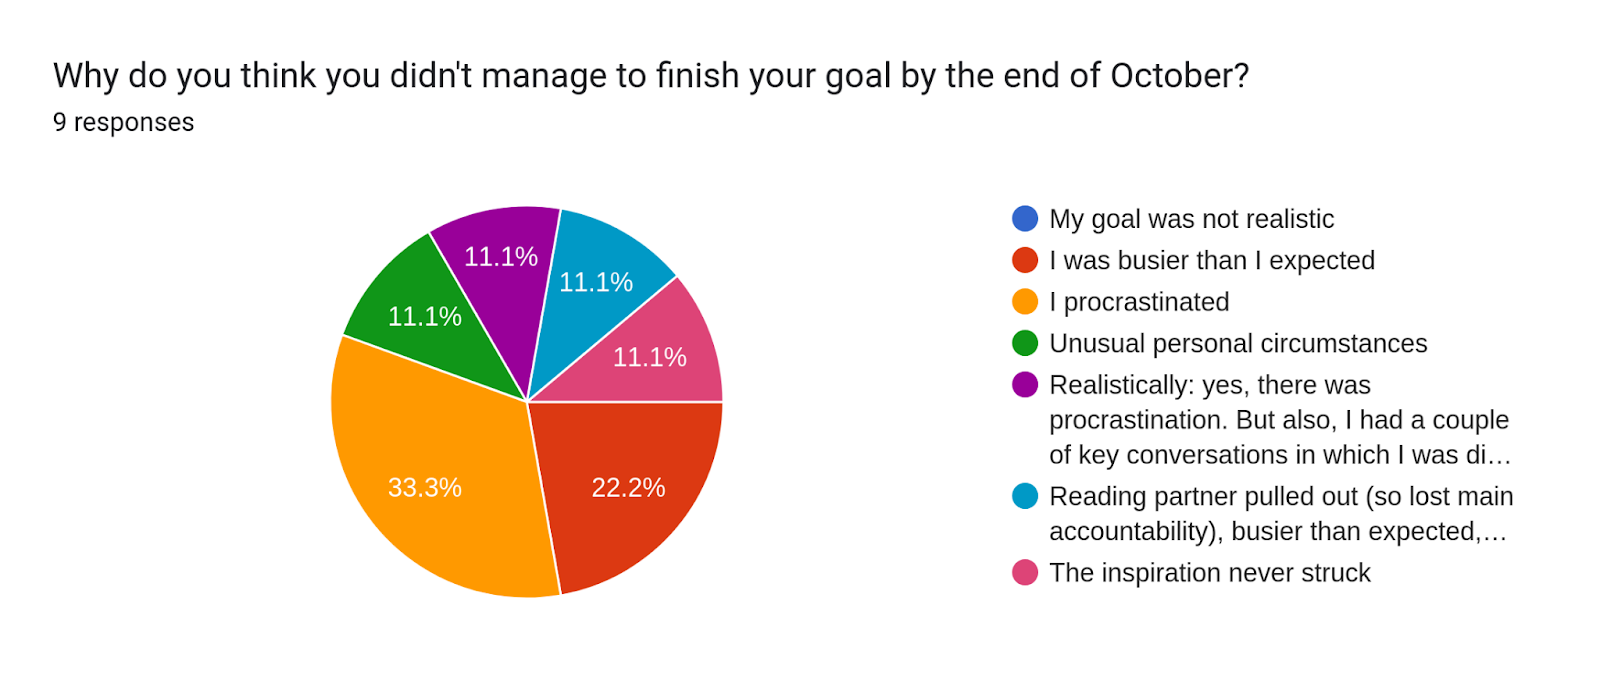 Forms response chart. Question title: Why do you think you didn't manage to finish your goal by the end of October?. Number of responses: 9 responses.